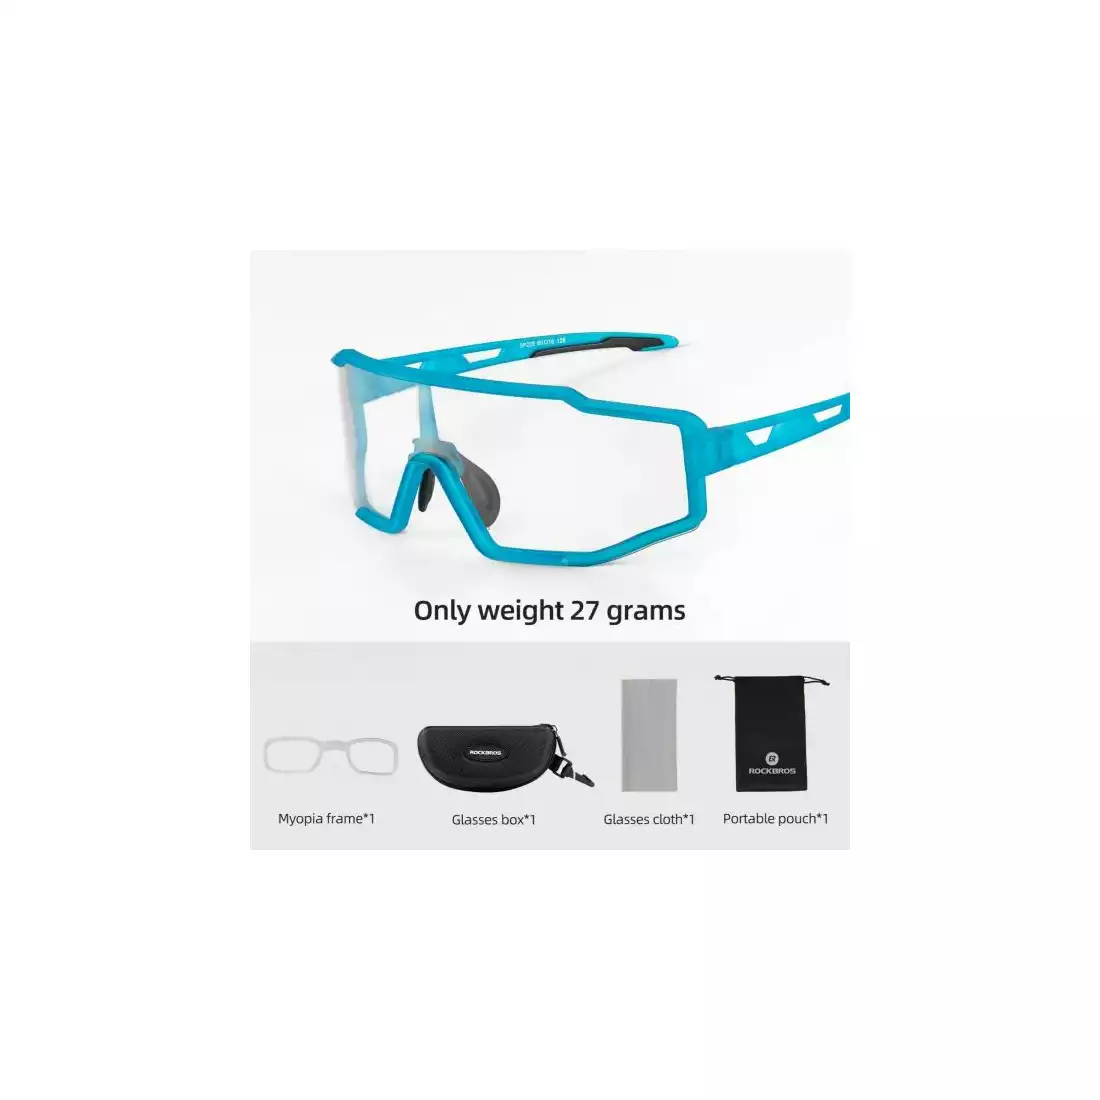 Rockbros SP225BL bicycle / sports glasses with photochrome blue